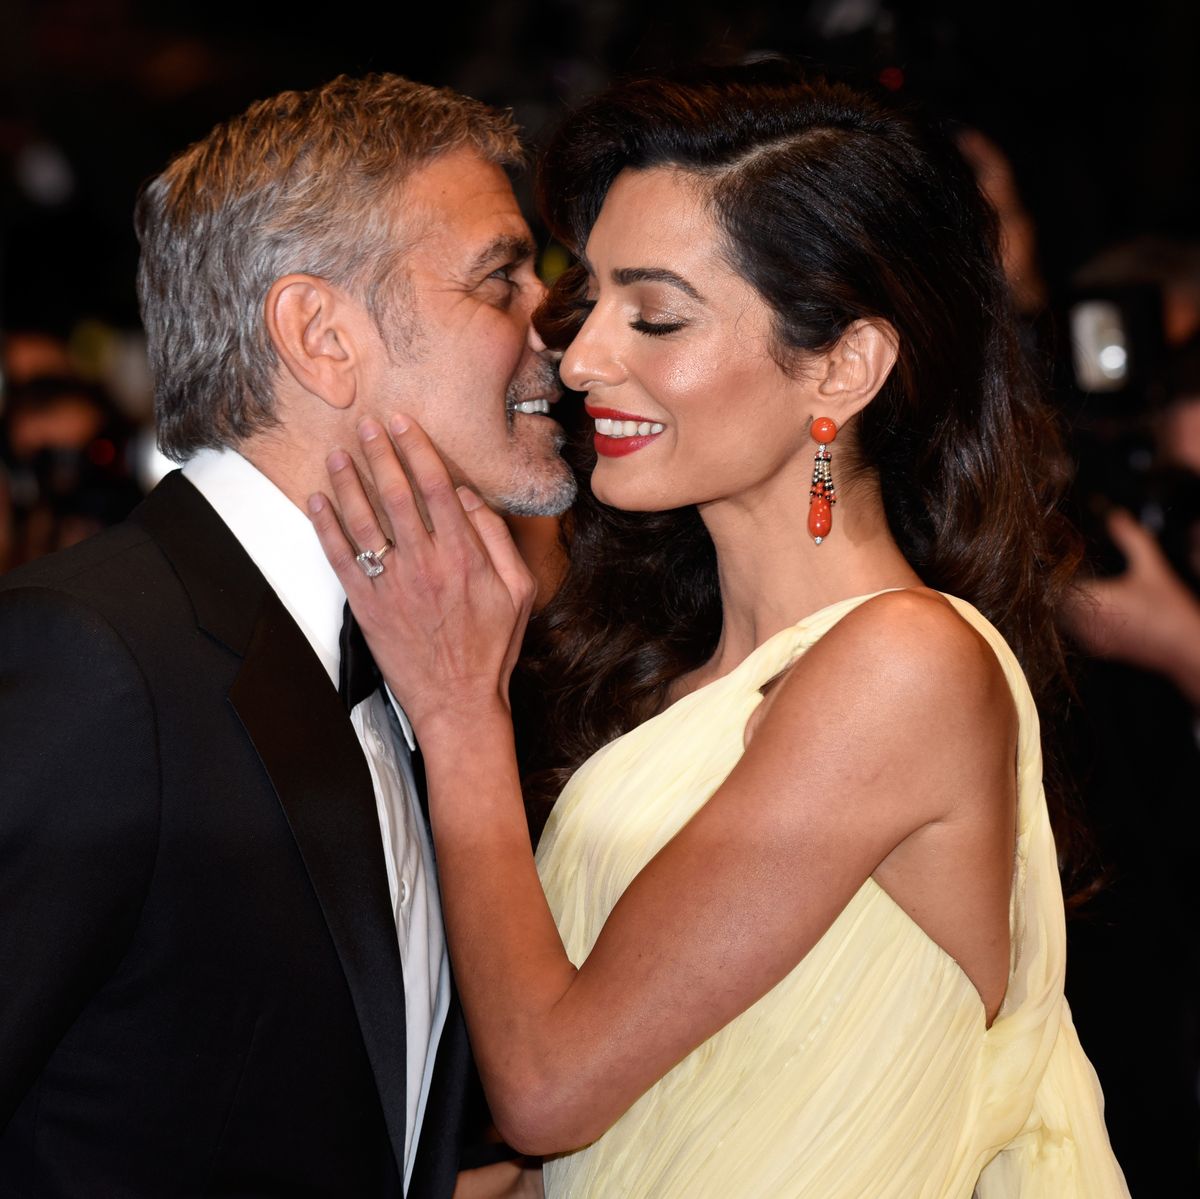 https://hips.hearstapps.com/hmg-prod/images/actor-george-clooney-and-his-wife-amal-clooney-attend-the-news-photo-1578417537.jpg?crop=0.668xw:1.00xh;0.129xw,0&resize=1200:*